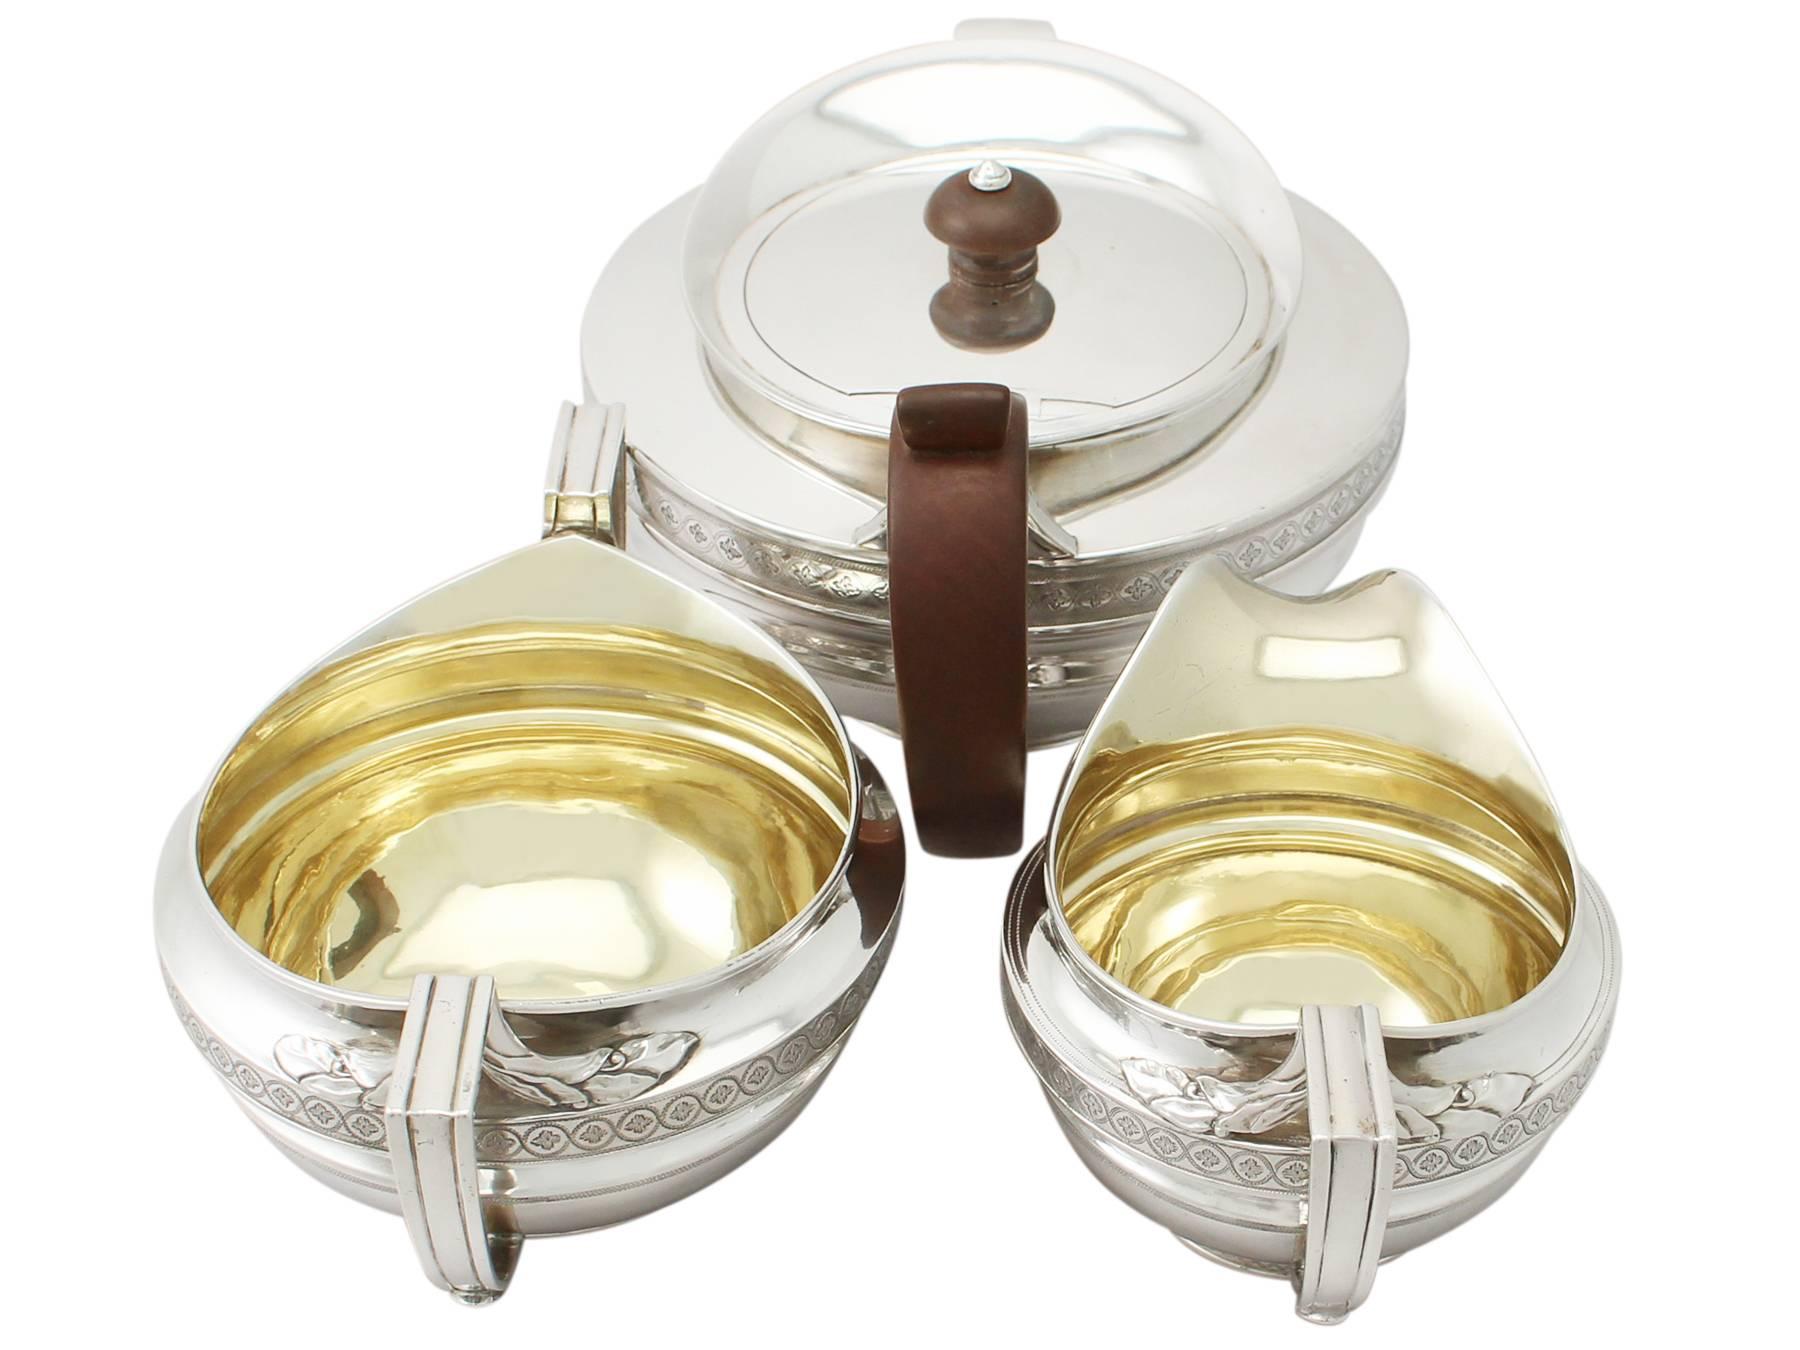 A fine and impressive antique George III English sterling silver three-piece tea service / set; part of our silver teaware collection.

This exceptional antique George III sterling silver three piece tea service consists of a cream jug, a tea pot